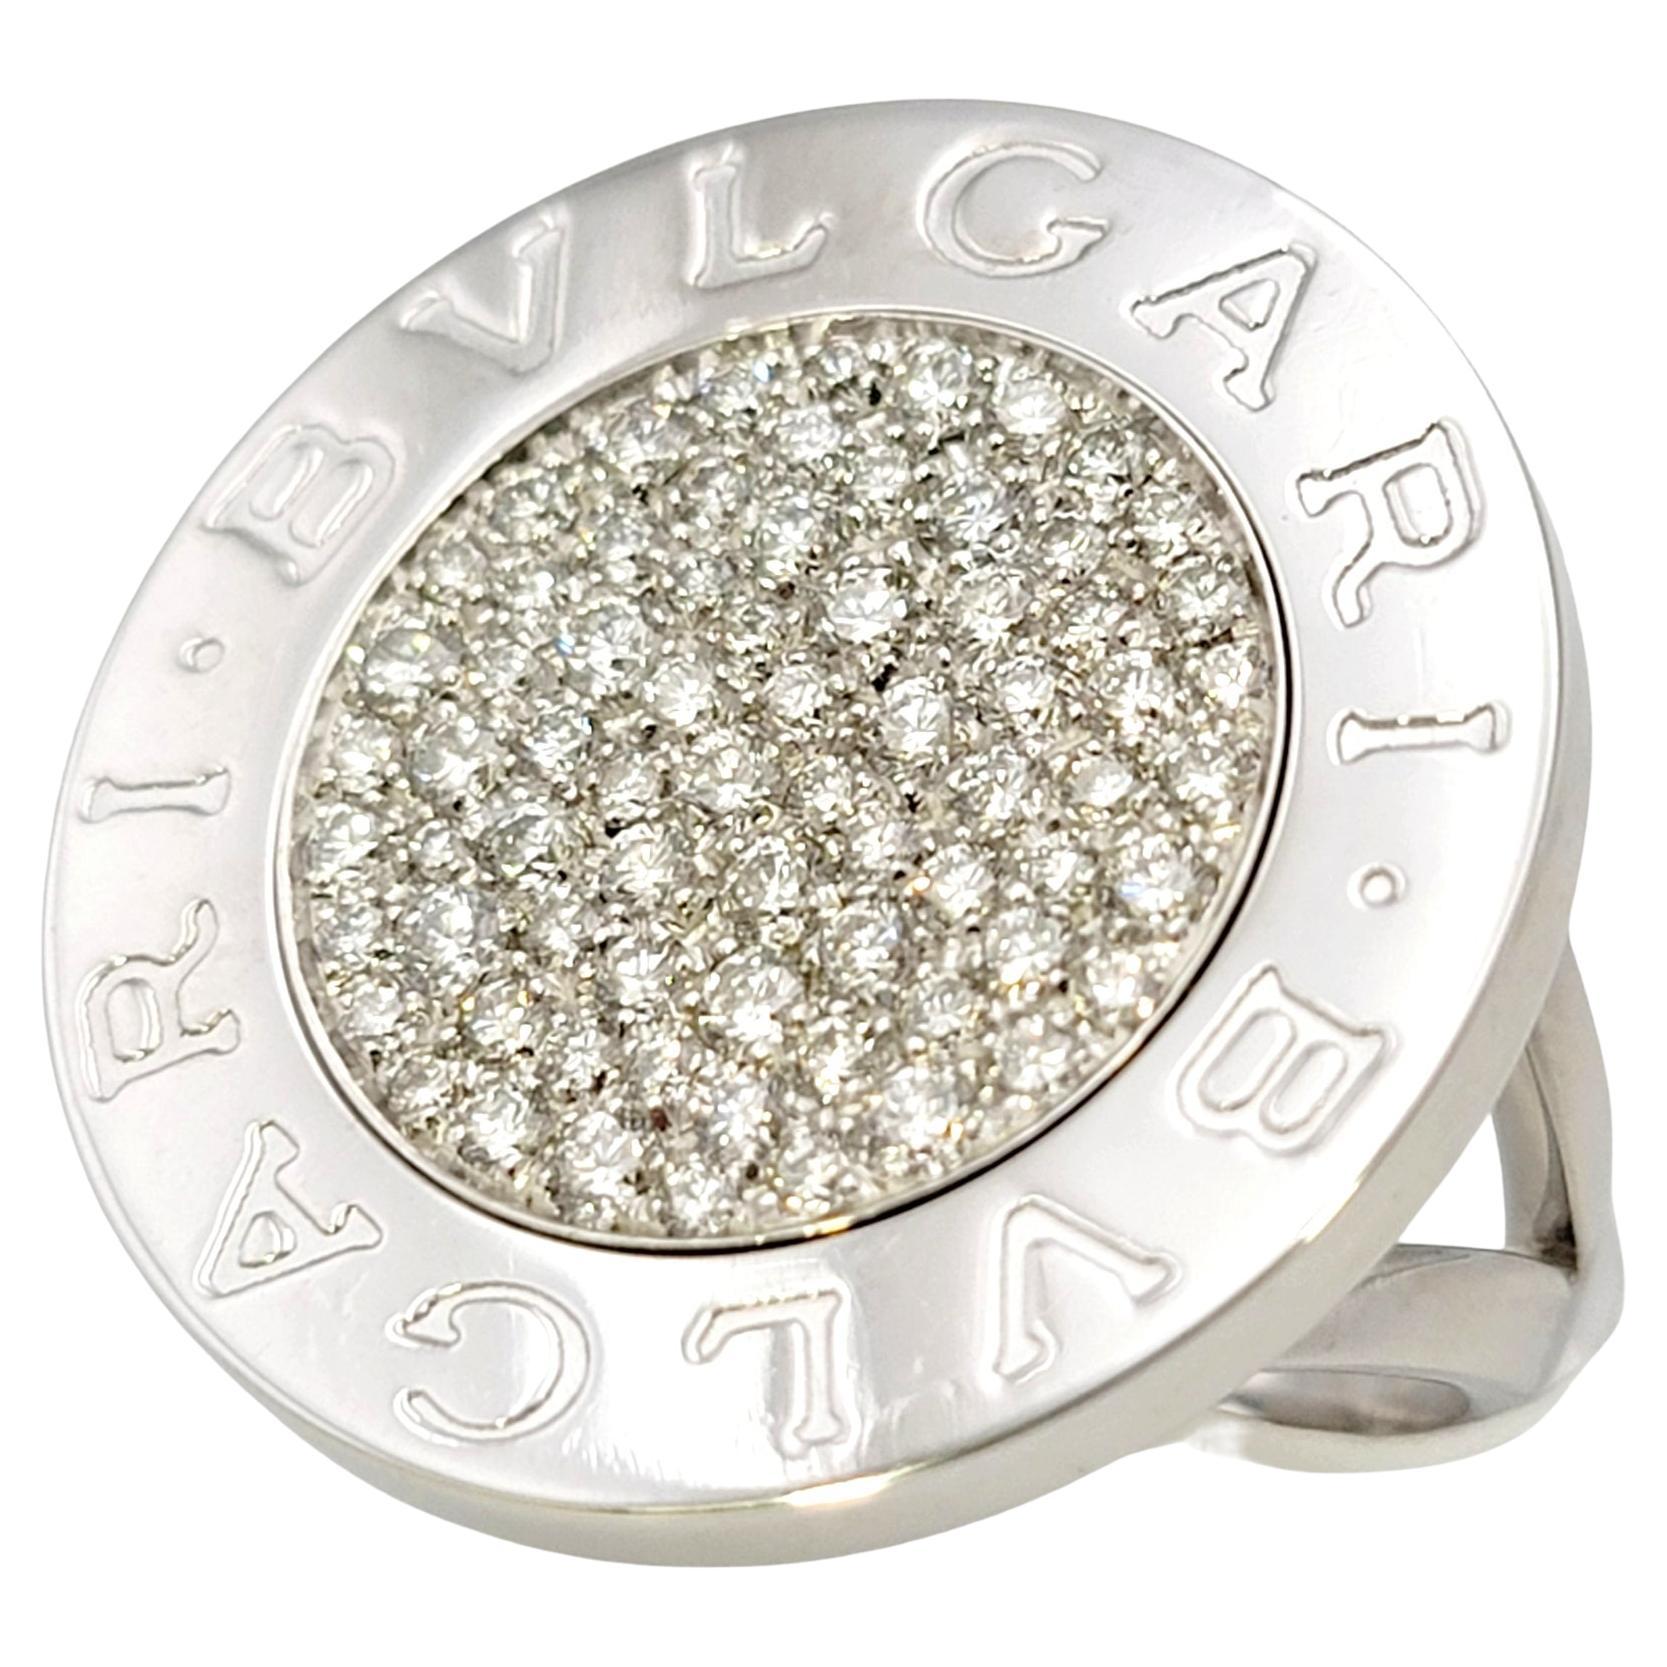 Ring size: 7.25

Stunning contemporary diamond cocktail ring by renowned designer, Bulgari. Bulgari is an Italian high-end luxury fashion house founded in 1884 and known for its jewelry, watches, fragrances, accessories, and leather goods.

This